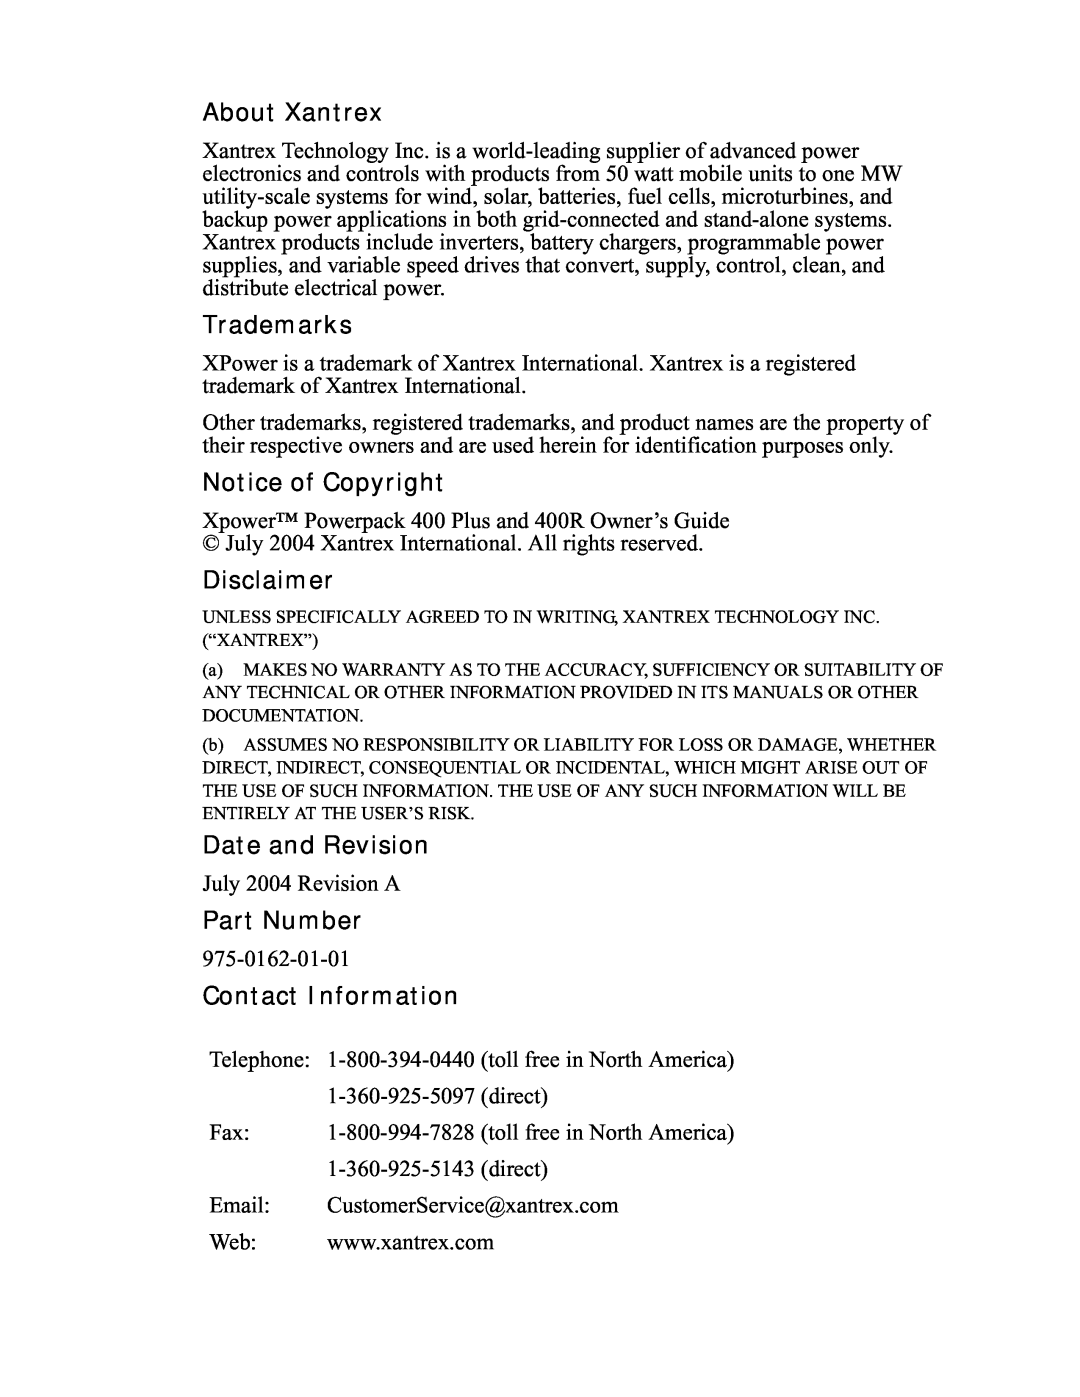 Xantrex Technology 400R manual About Xantrex, Trademarks, Notice of Copyright, Disclaimer, Date and Revision, Part Number 